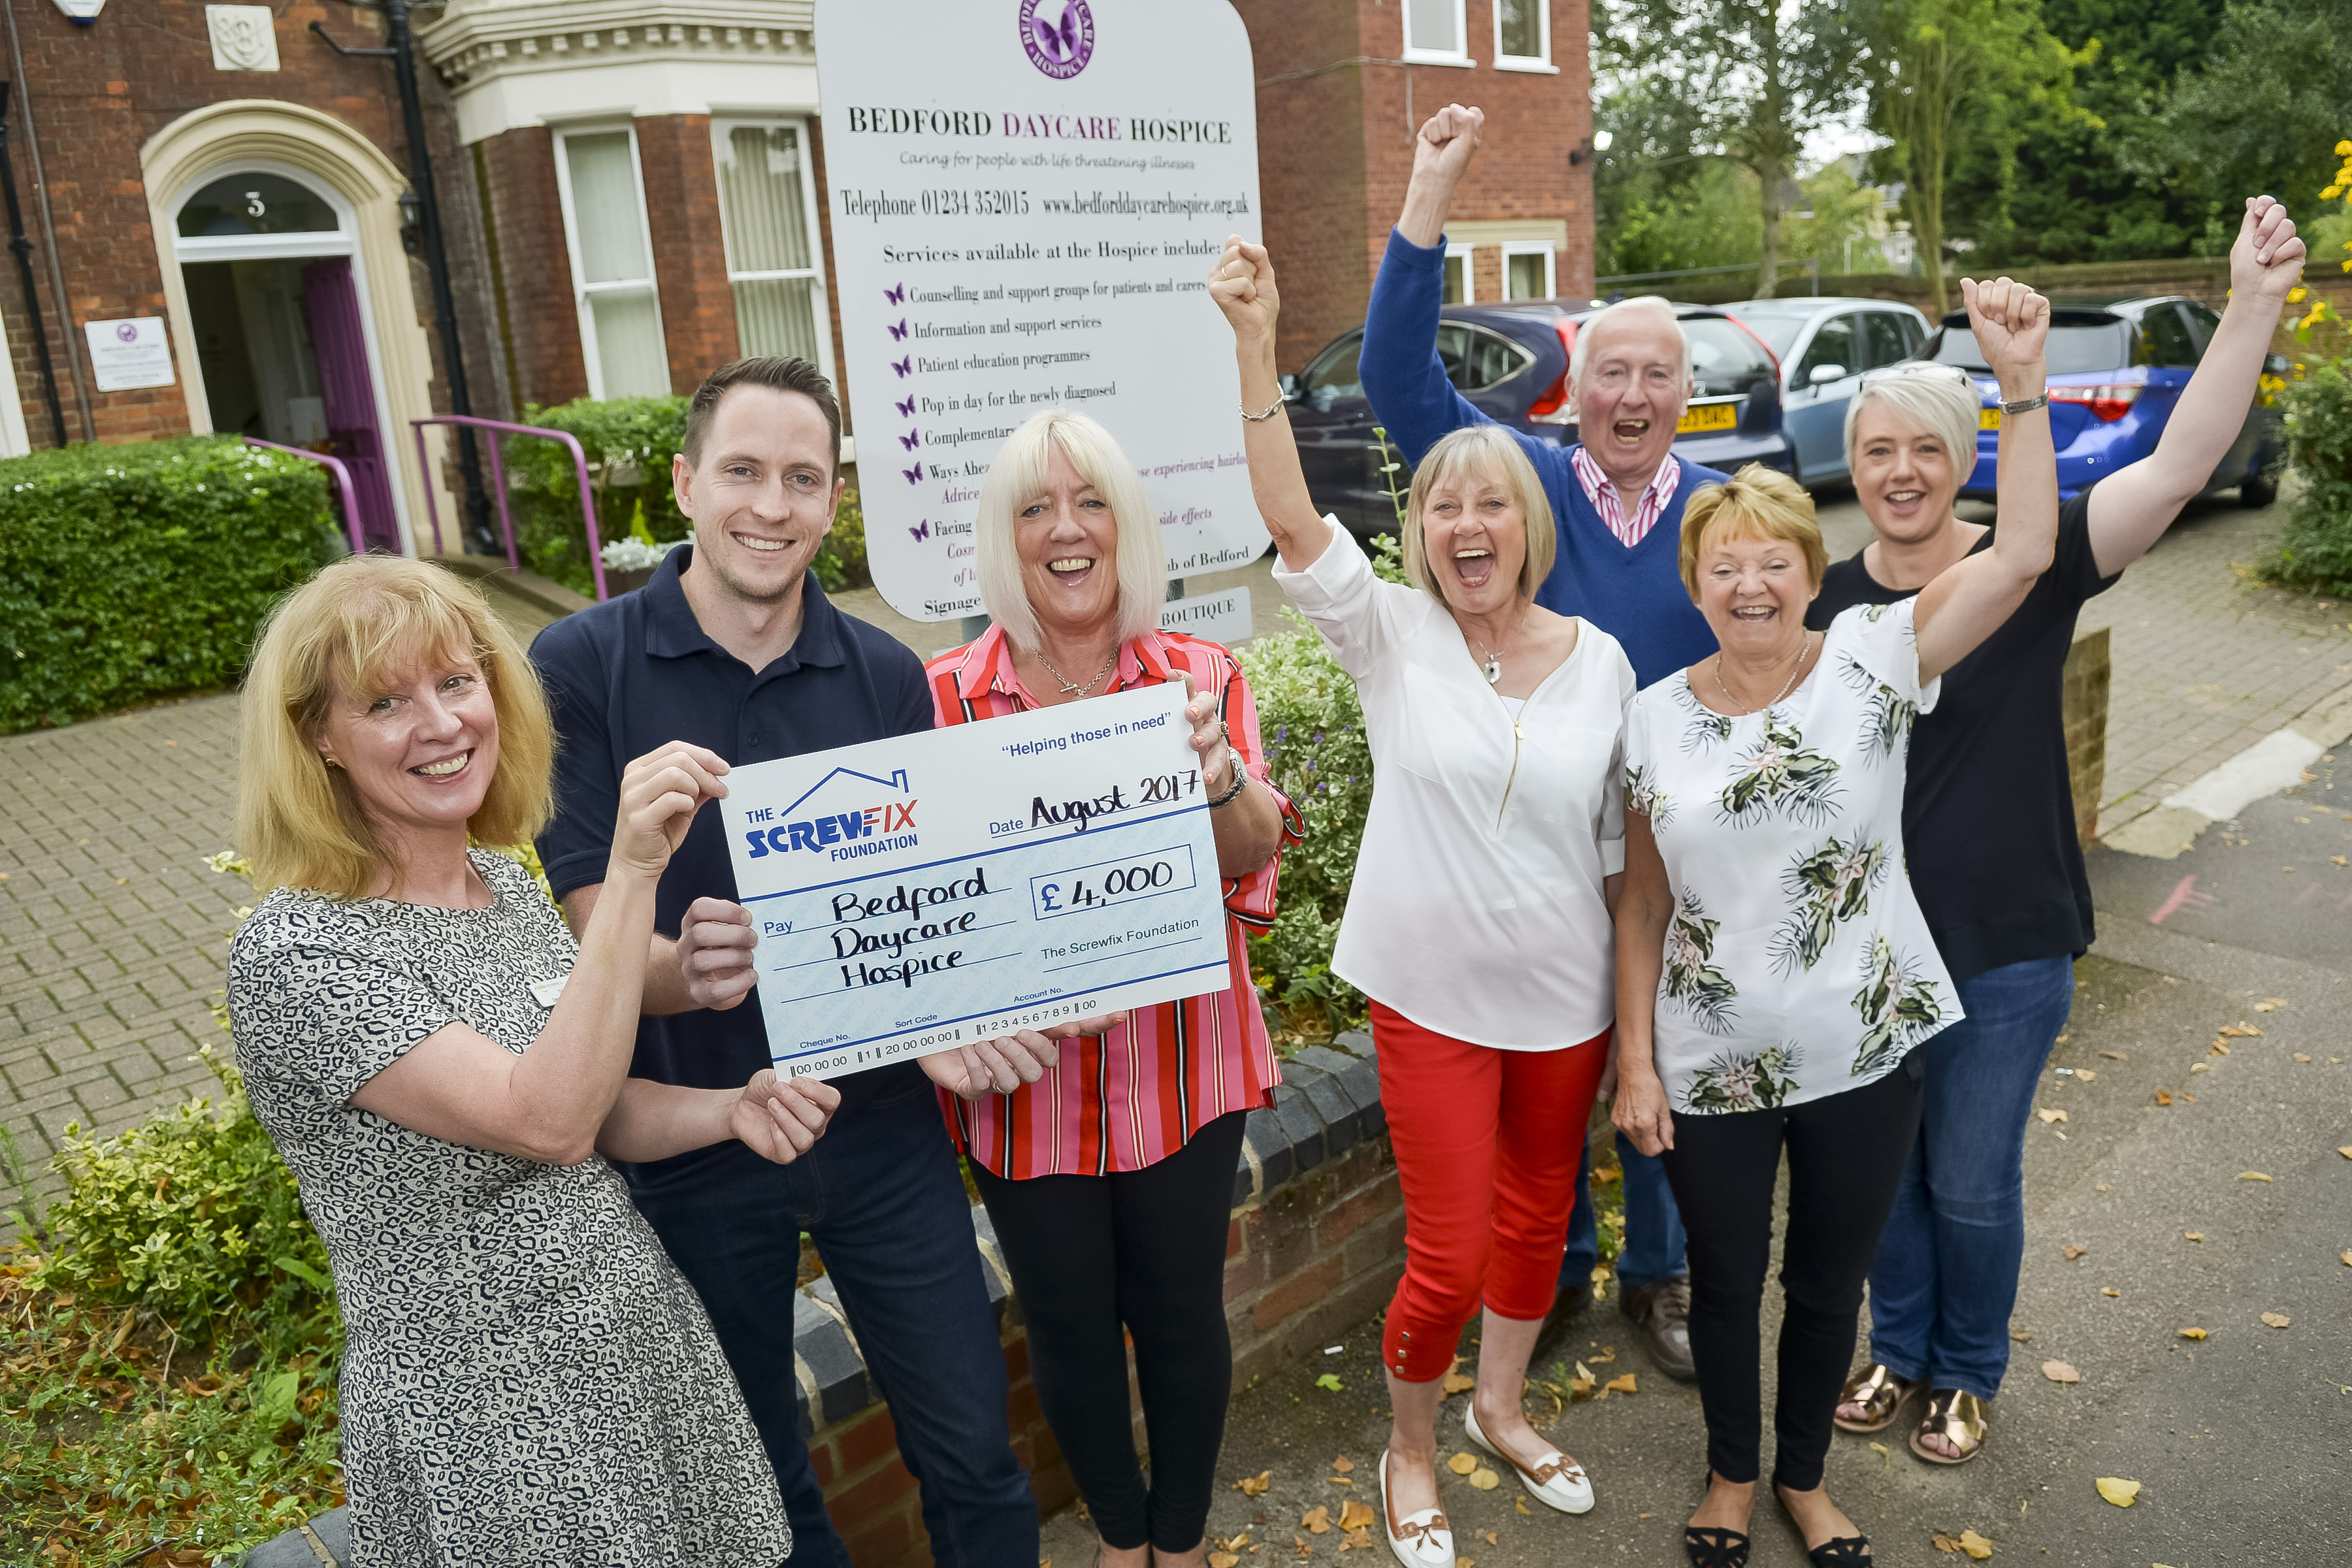 The Screwfix Foundation supports Bedford Daycare Hospice